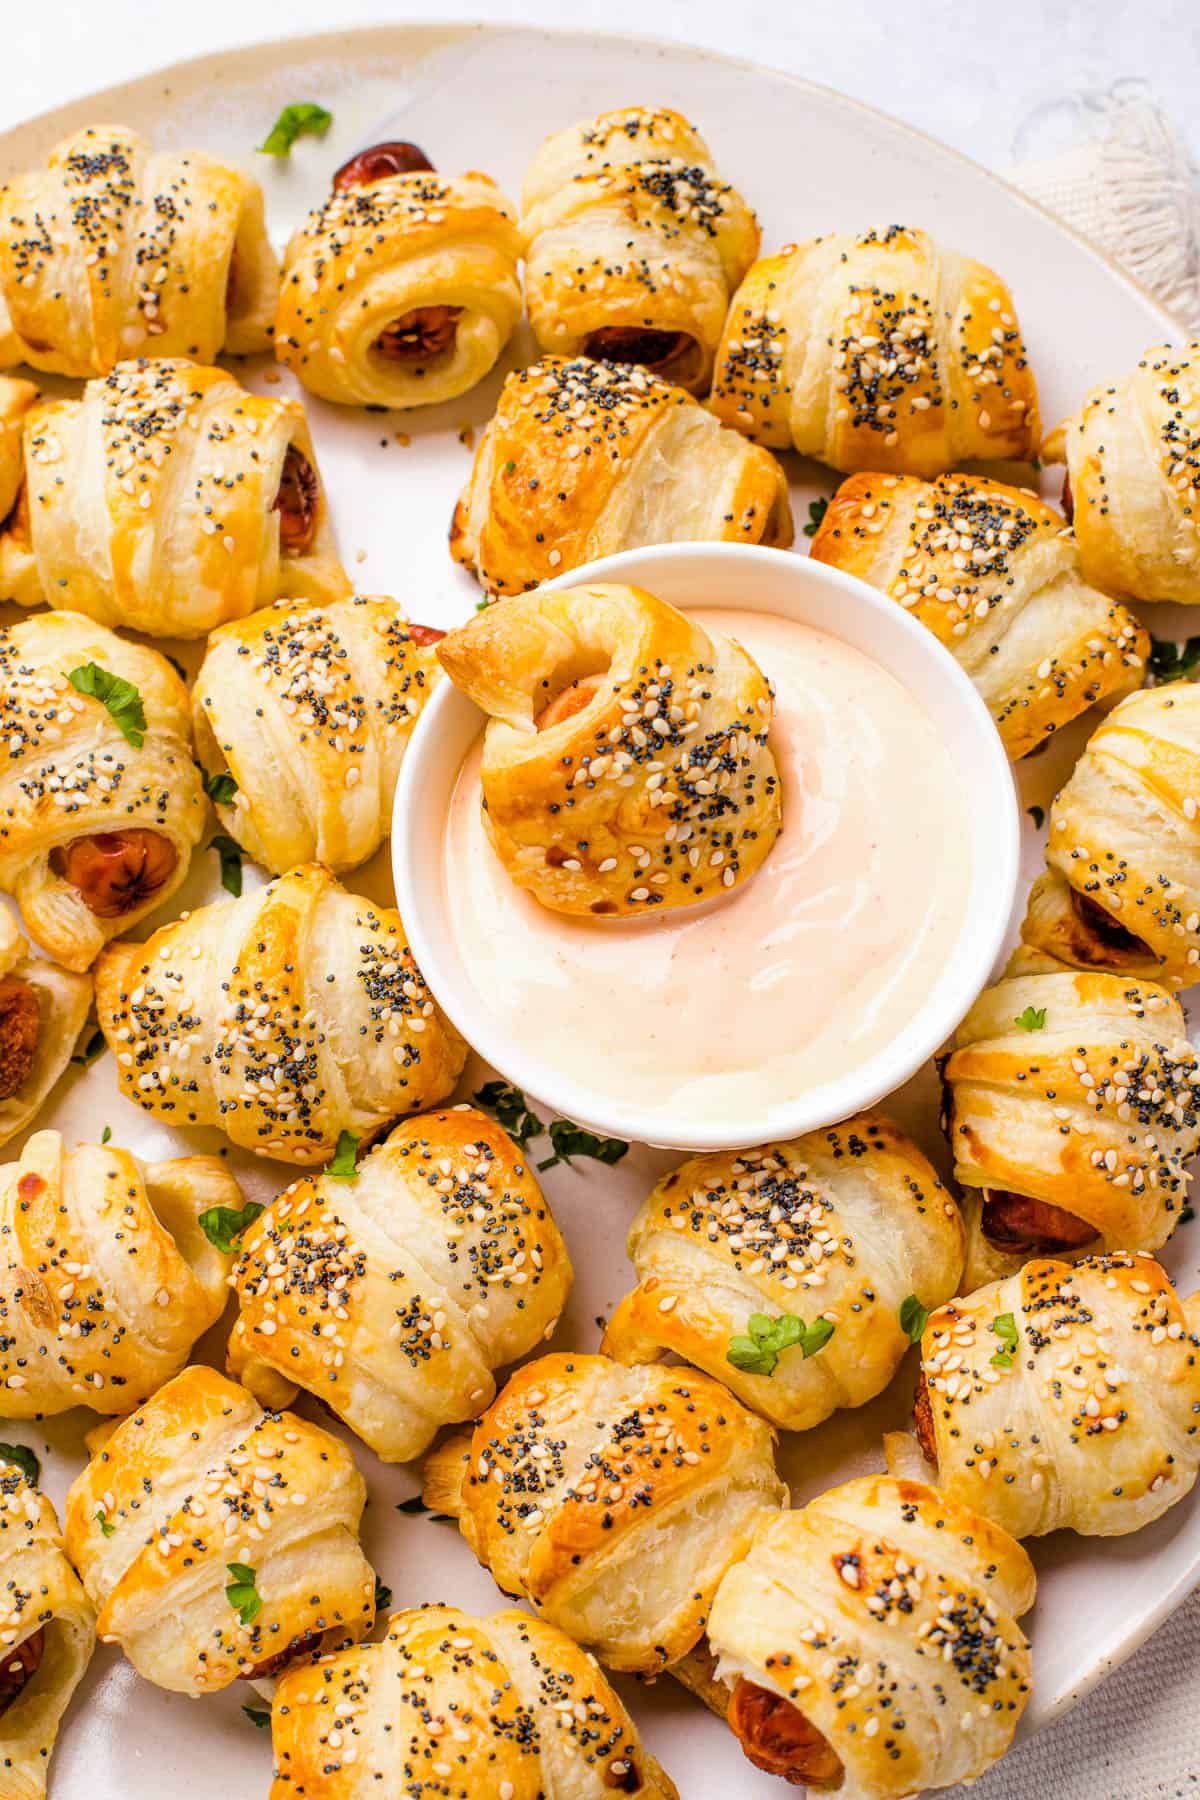 A platter of pigs in a blanket with a bowl of dipping sauce in the center. One pastry is dipped in the sauce.